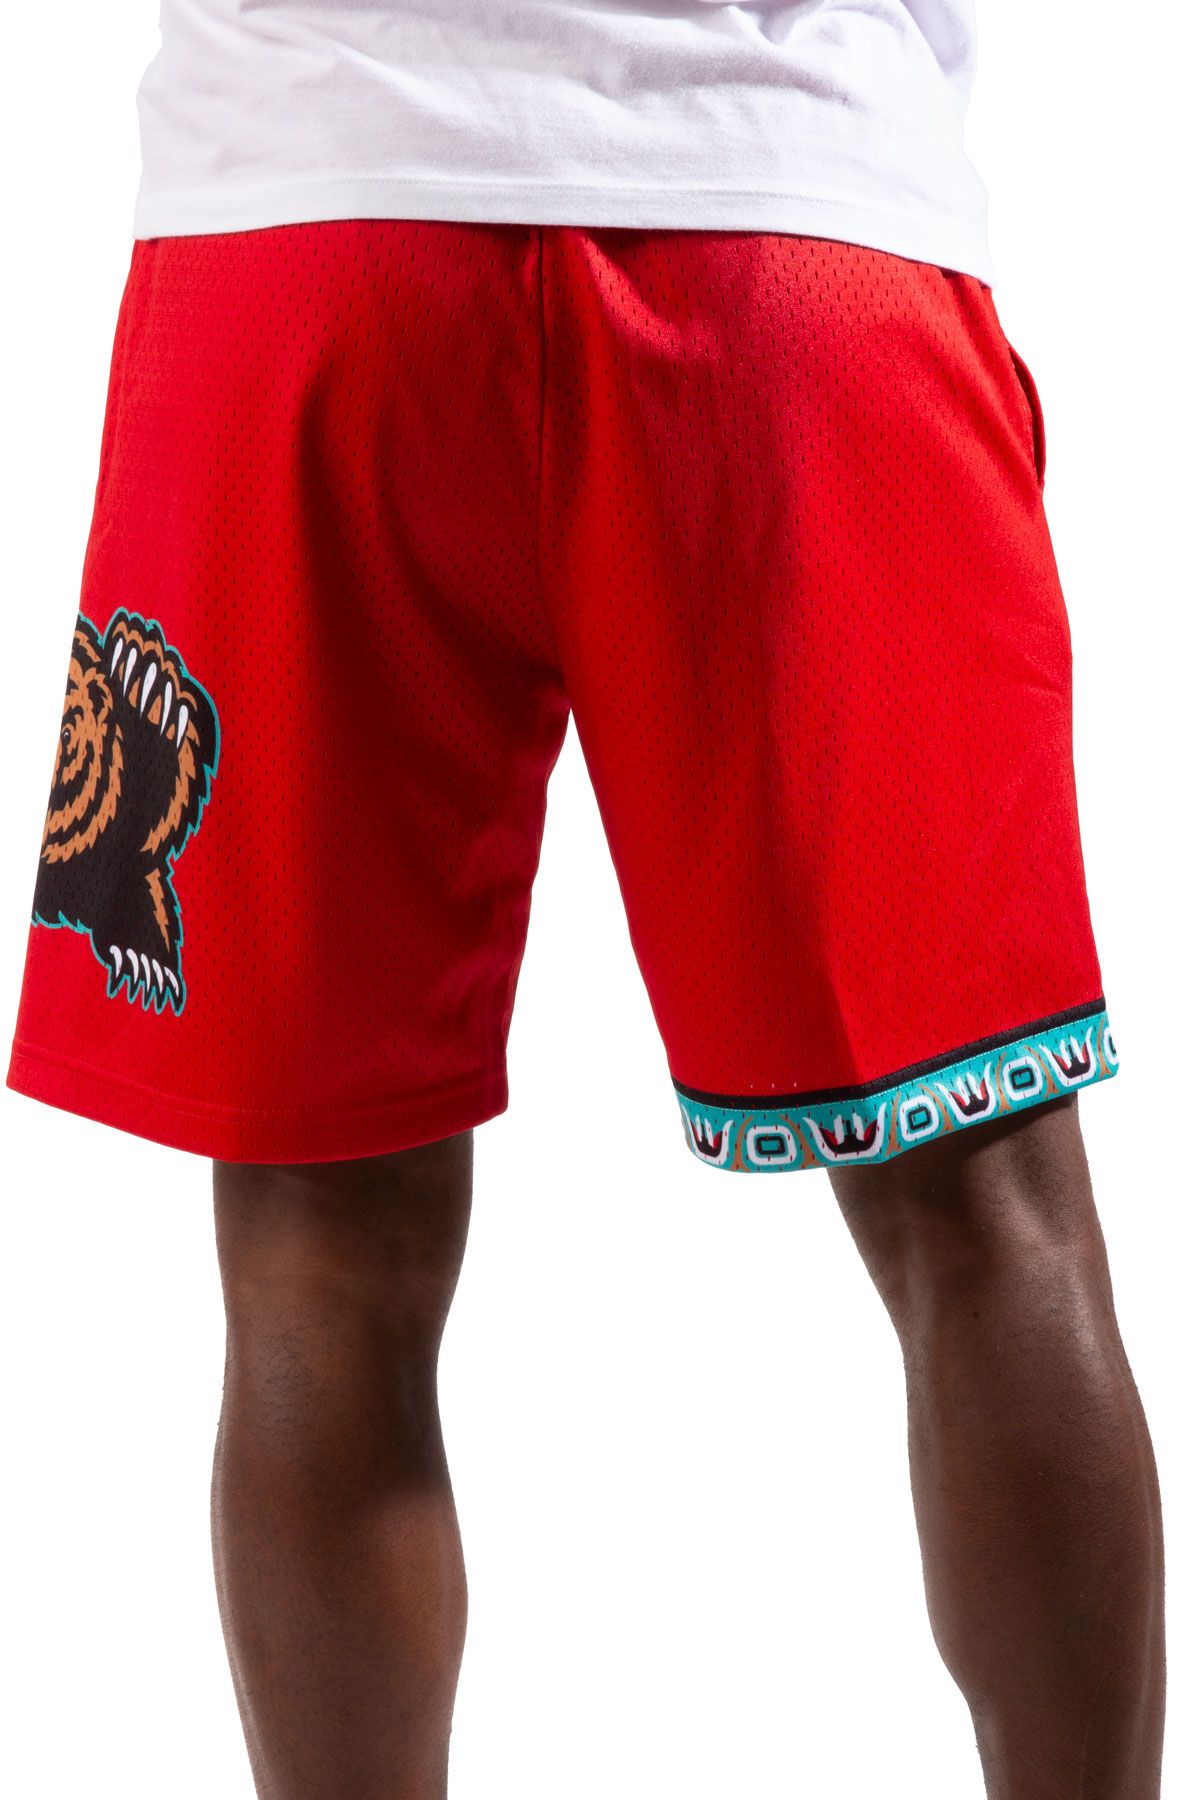 Mitchell & Ness Vancouver Grizzlies Teal Swingman Shorts - Gameday